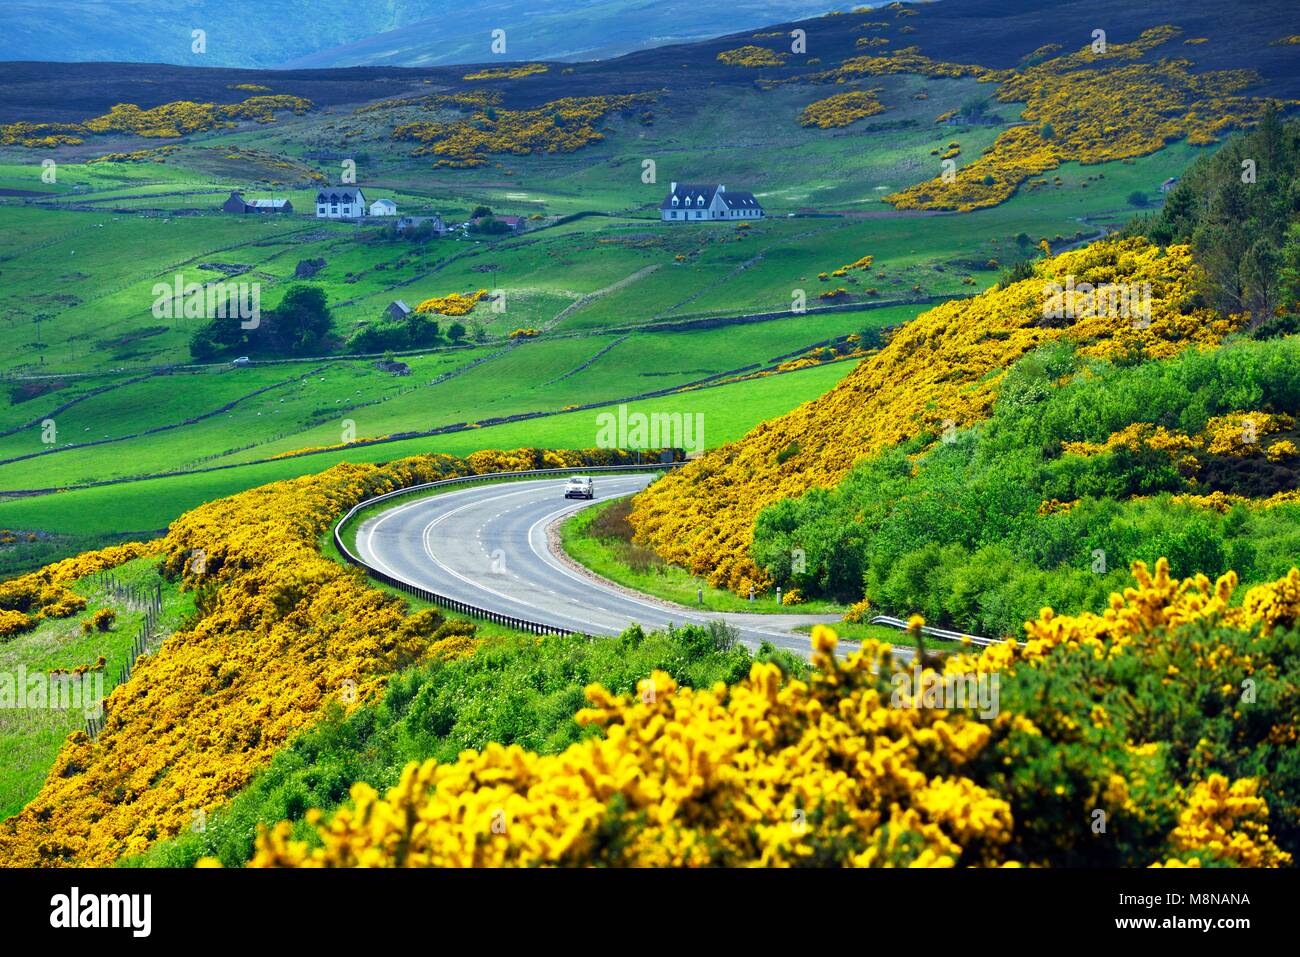 A9 main trunk road climbs 2 miles north of Helmsdale, Sutherland on Scotlands N.E. coast. Looking south over early summer yellow gorse and farmland Stock Photo